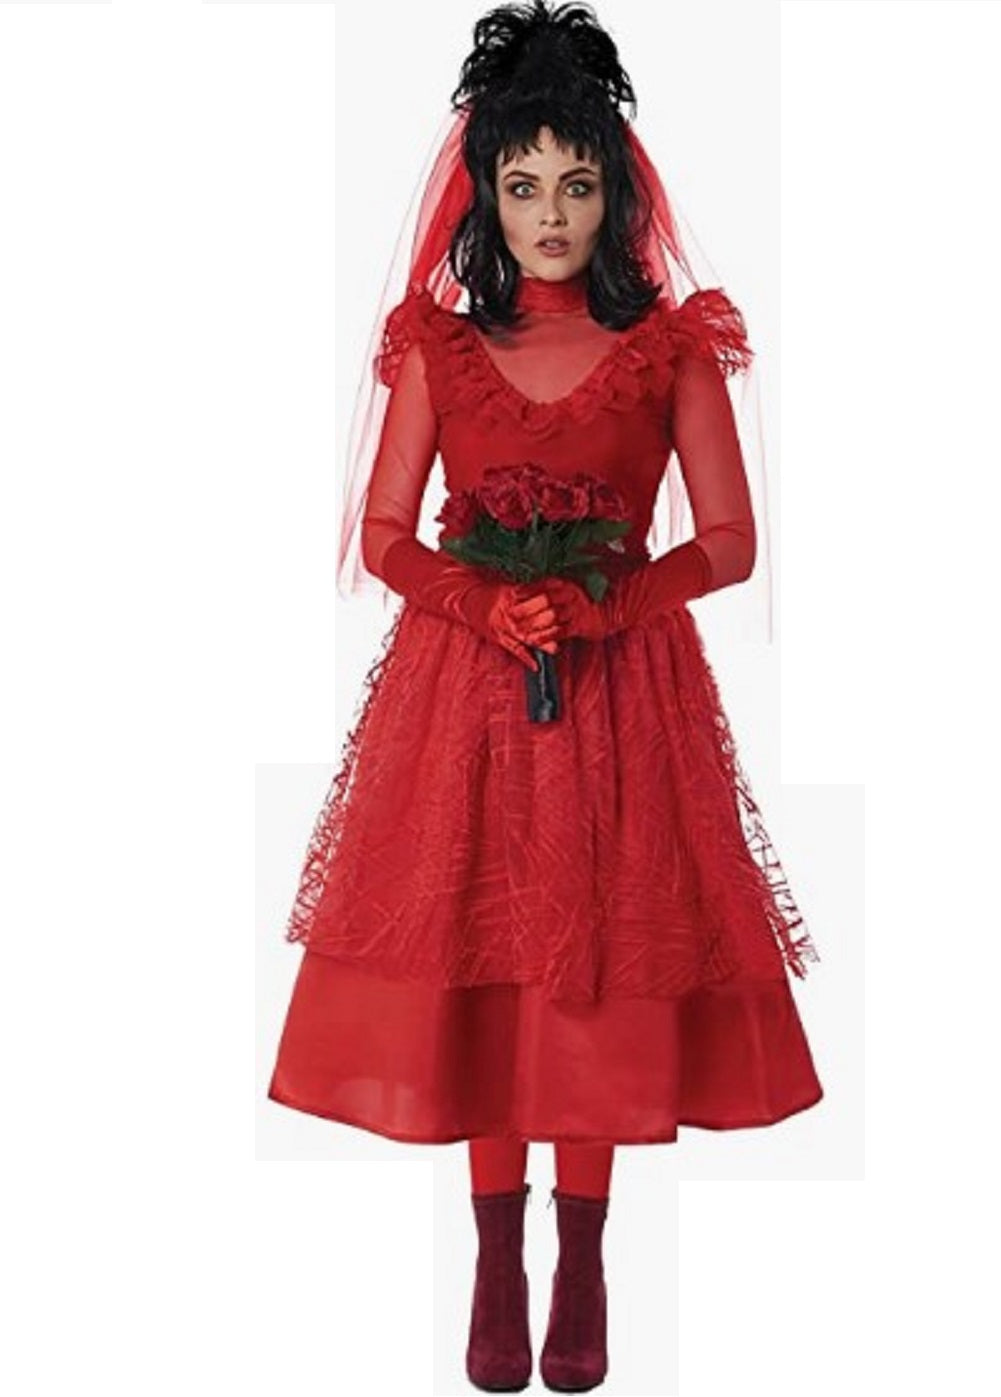 Lydia - Beetlejuice - Bride From Hell - Costume - Adult - 3 Sizes